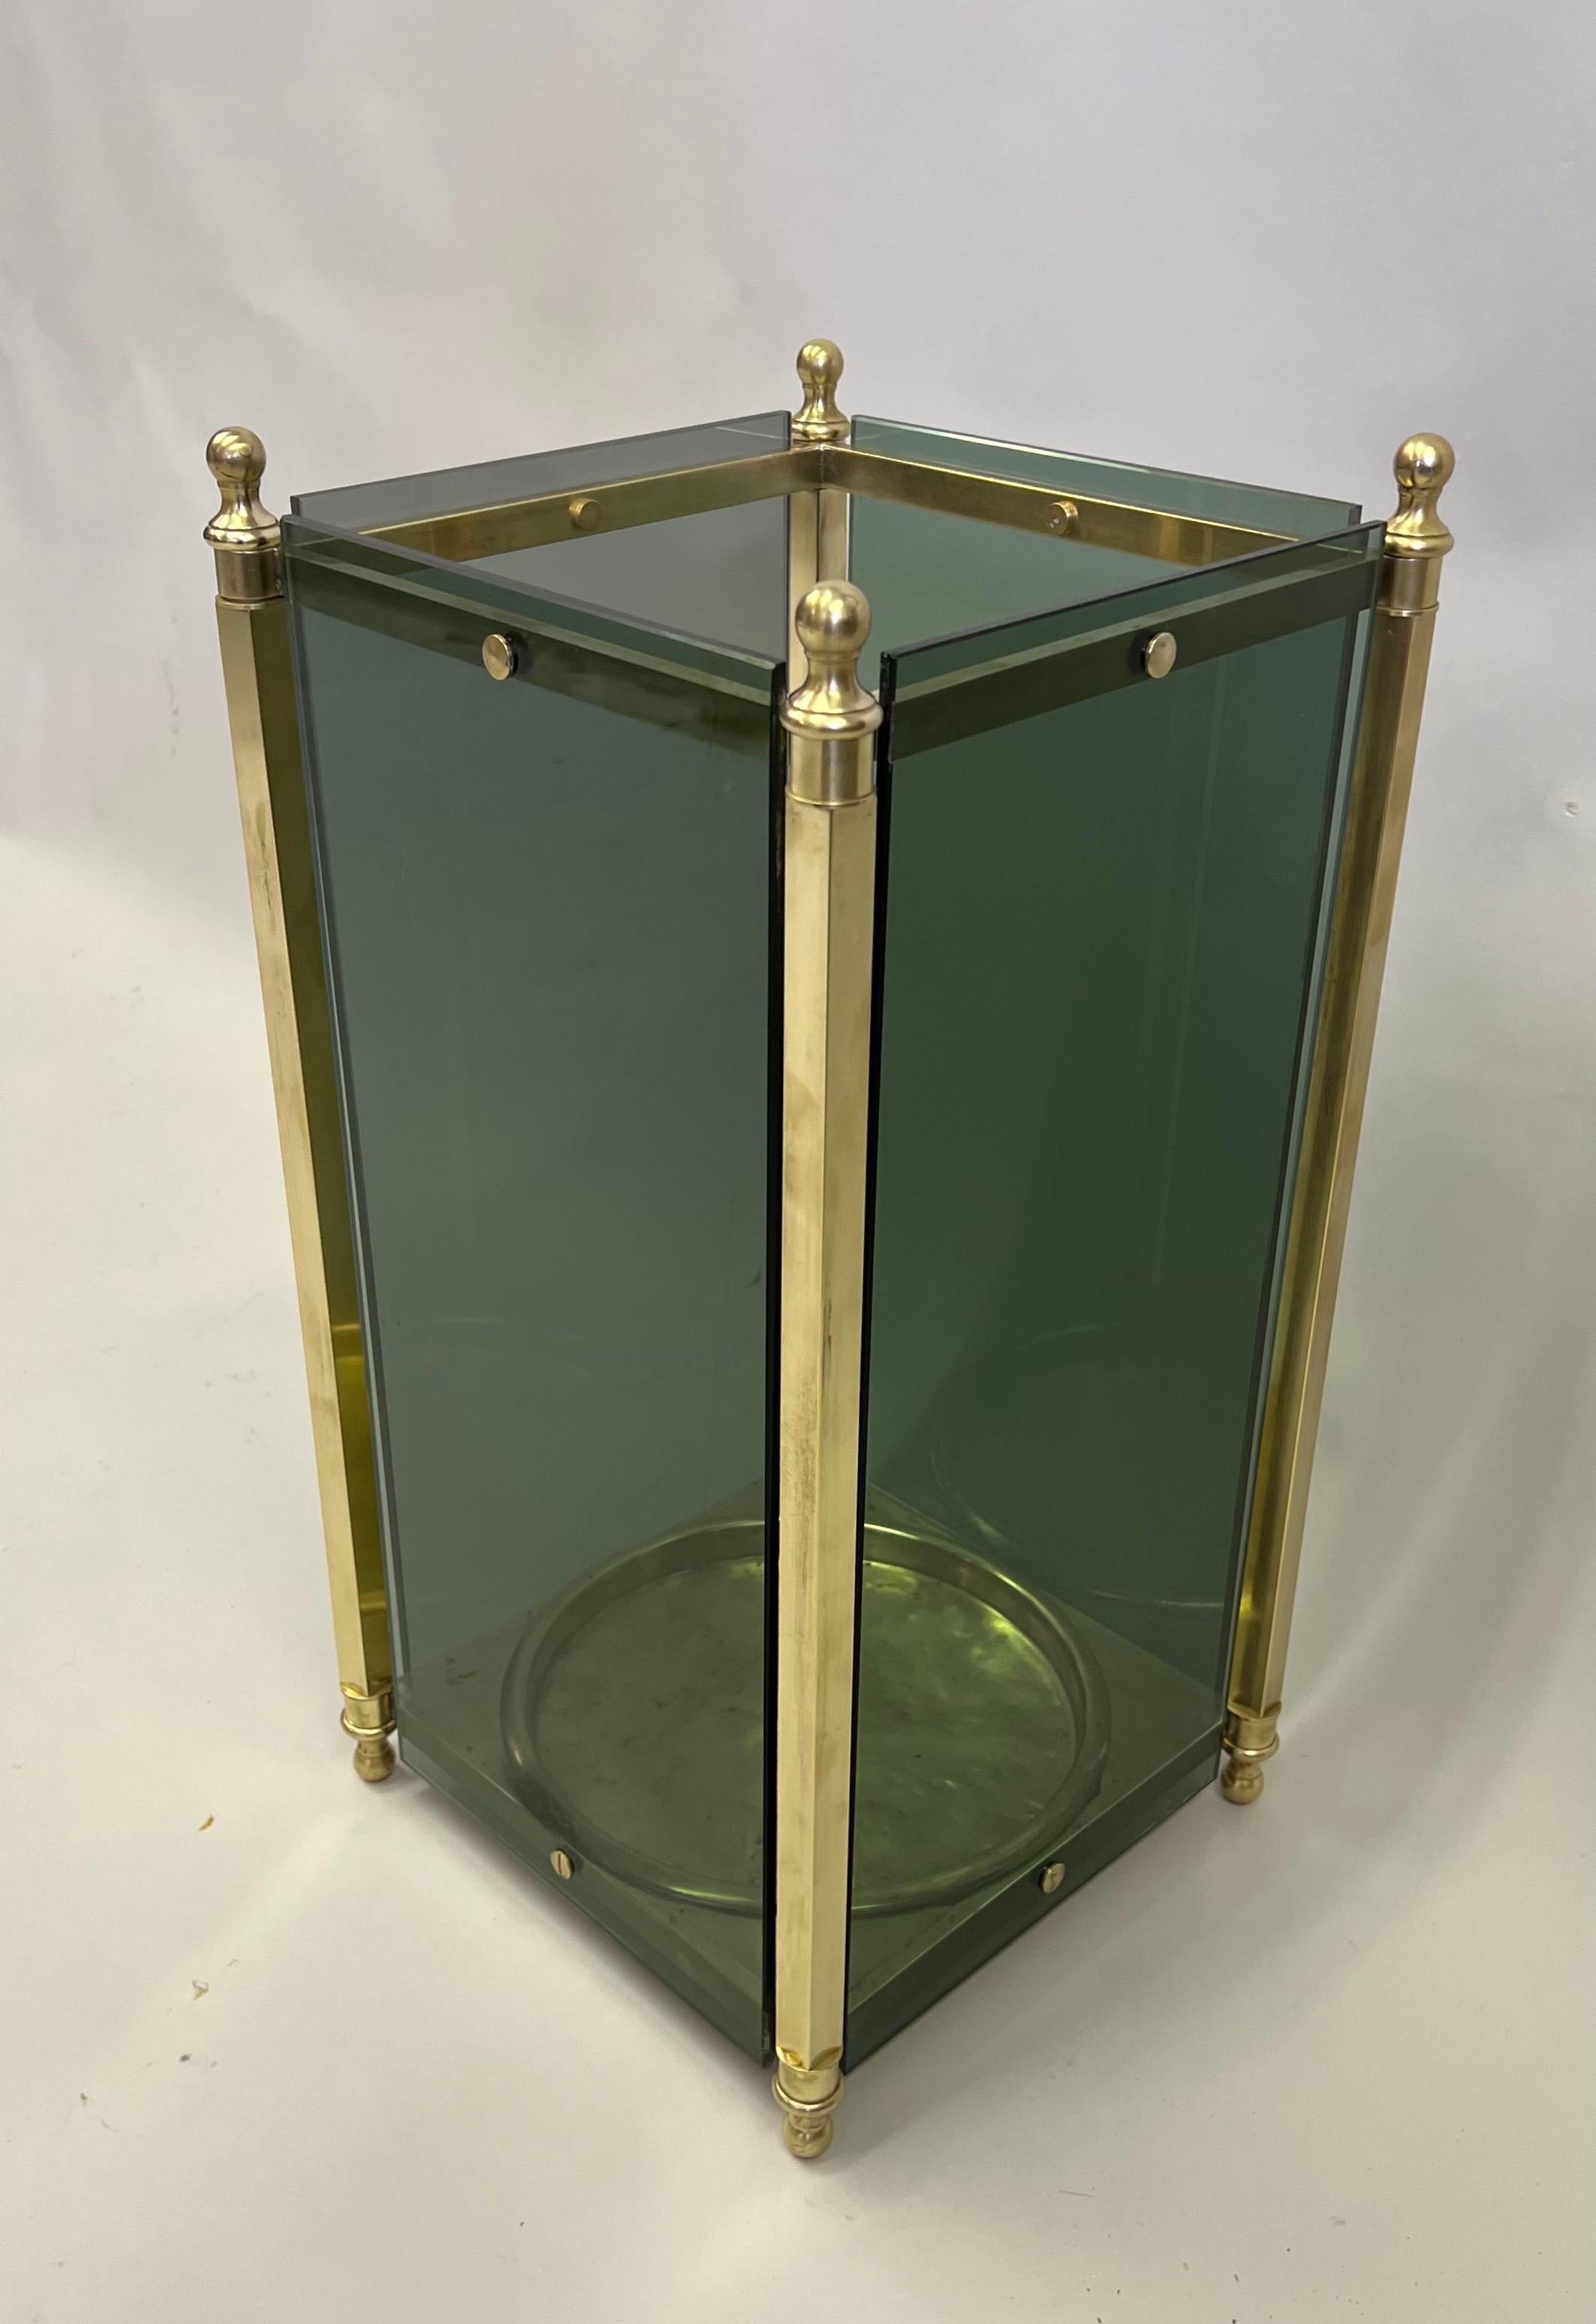 Hand-Crafted Italian Modern Neoclassical Brass & Green Glass Umbrella Stand by Fontana Arte For Sale